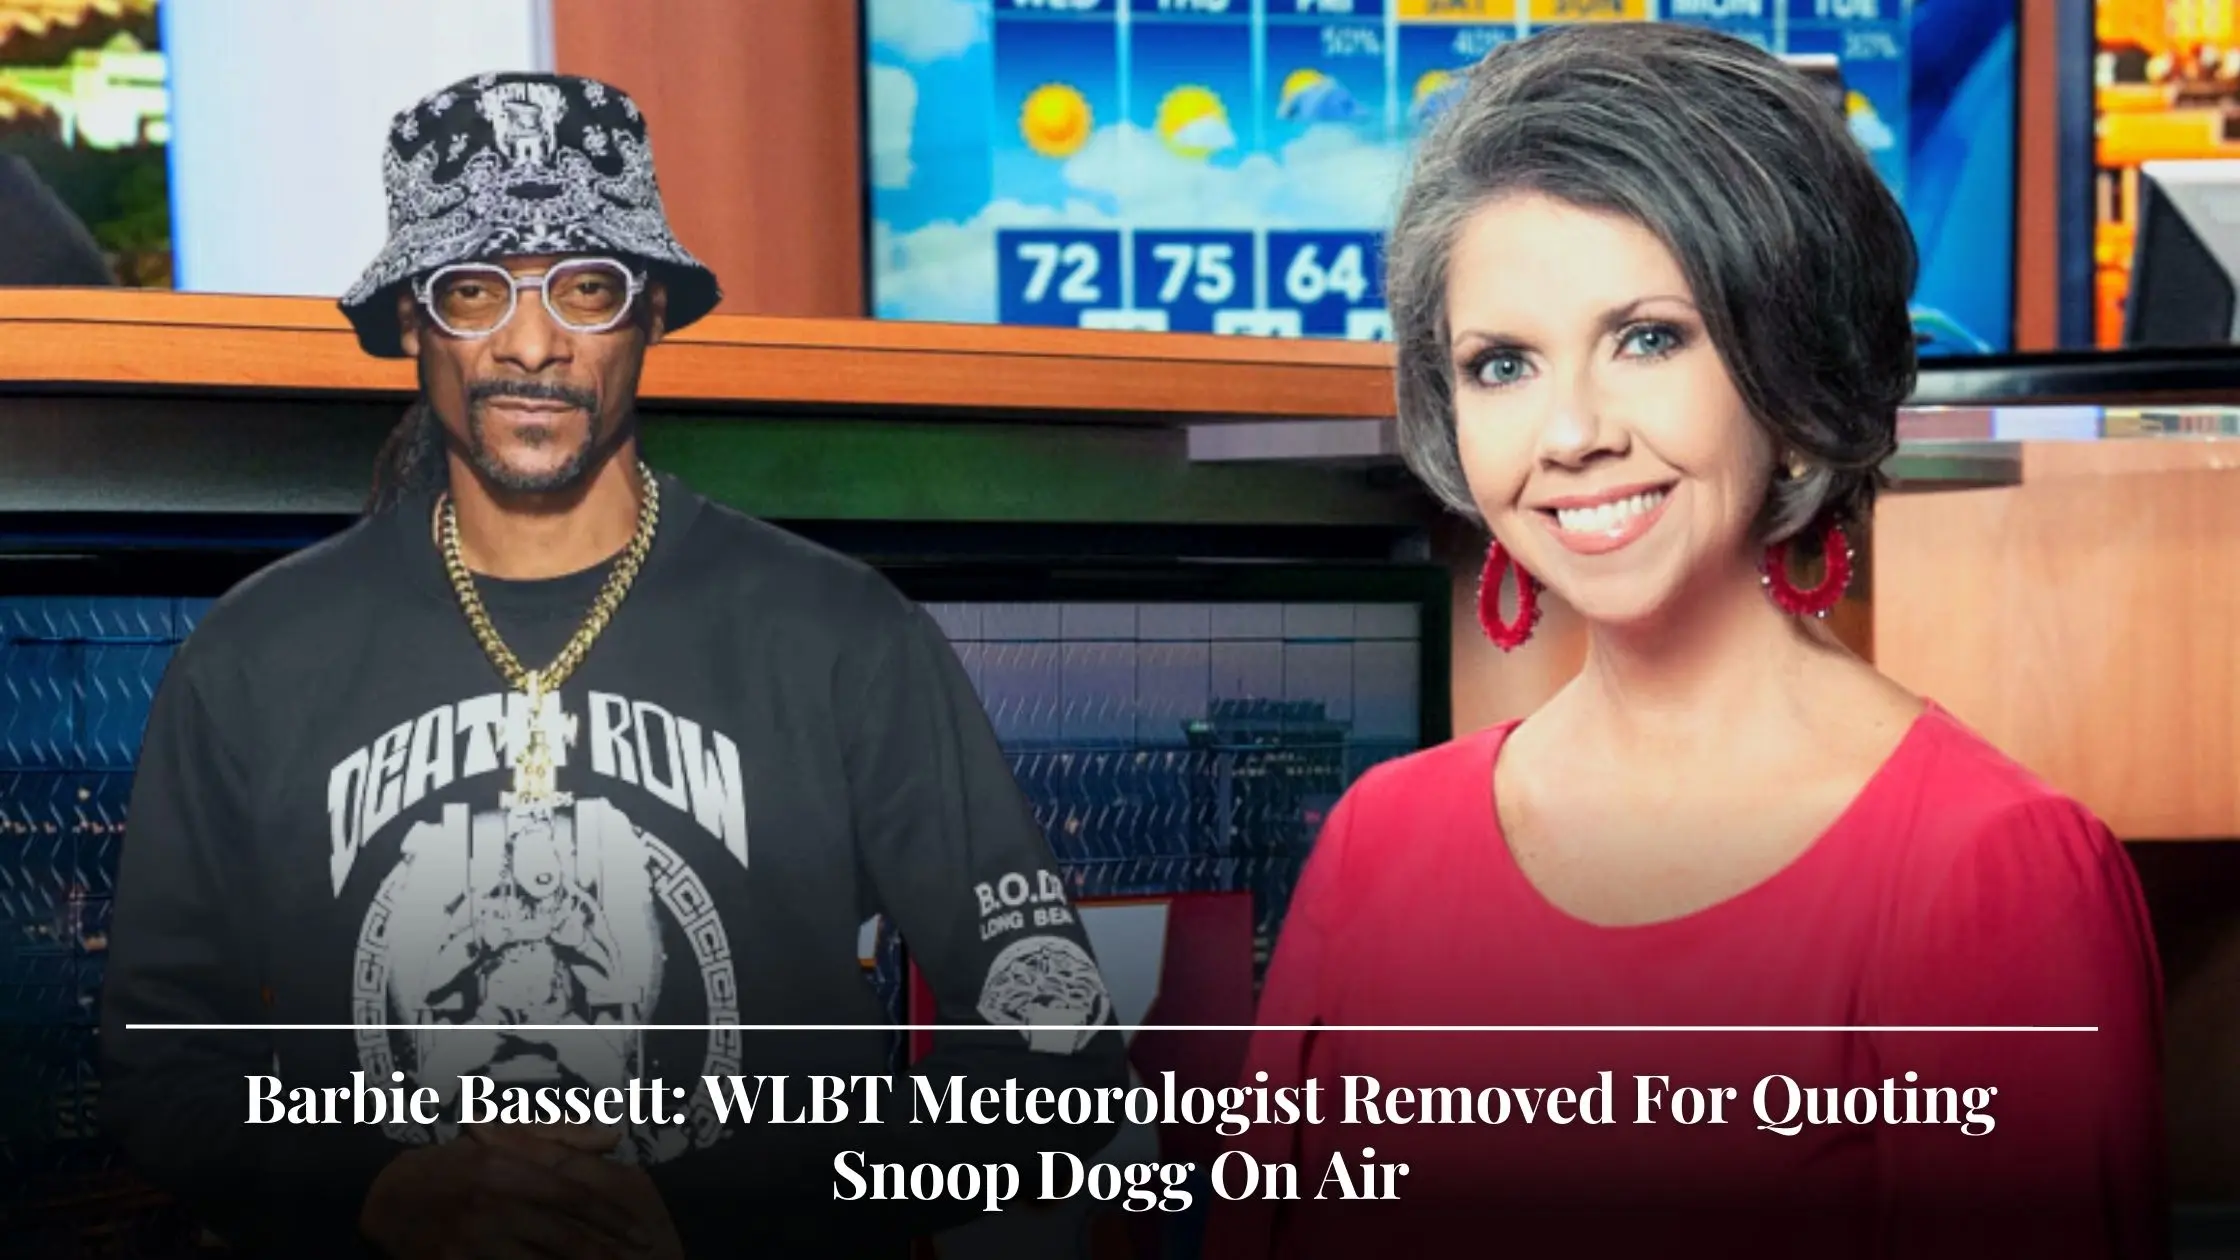 Barbie Bassett WLBT Meteorologist Removed For Quoting Snoop Dogg On Air